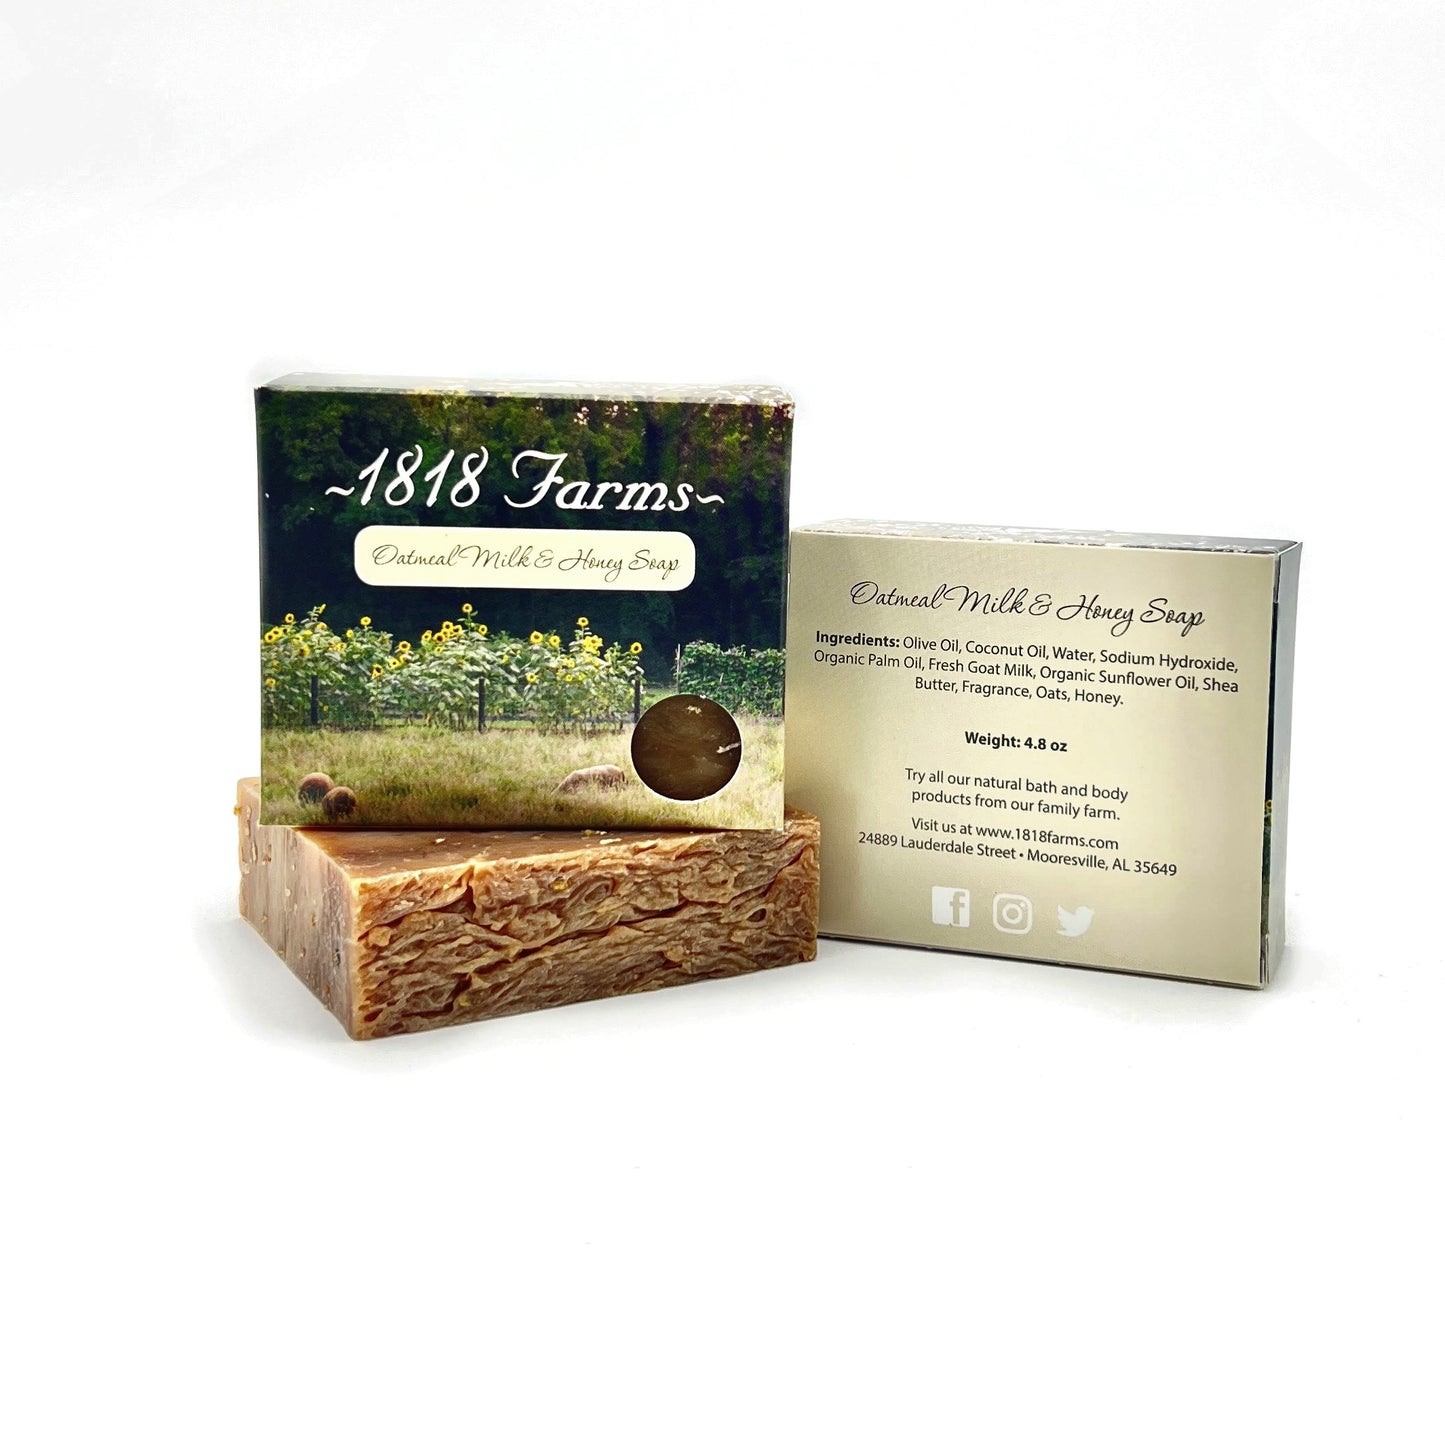 A Yoga Lover's Gift Box Gift Basket 1818 Farms   